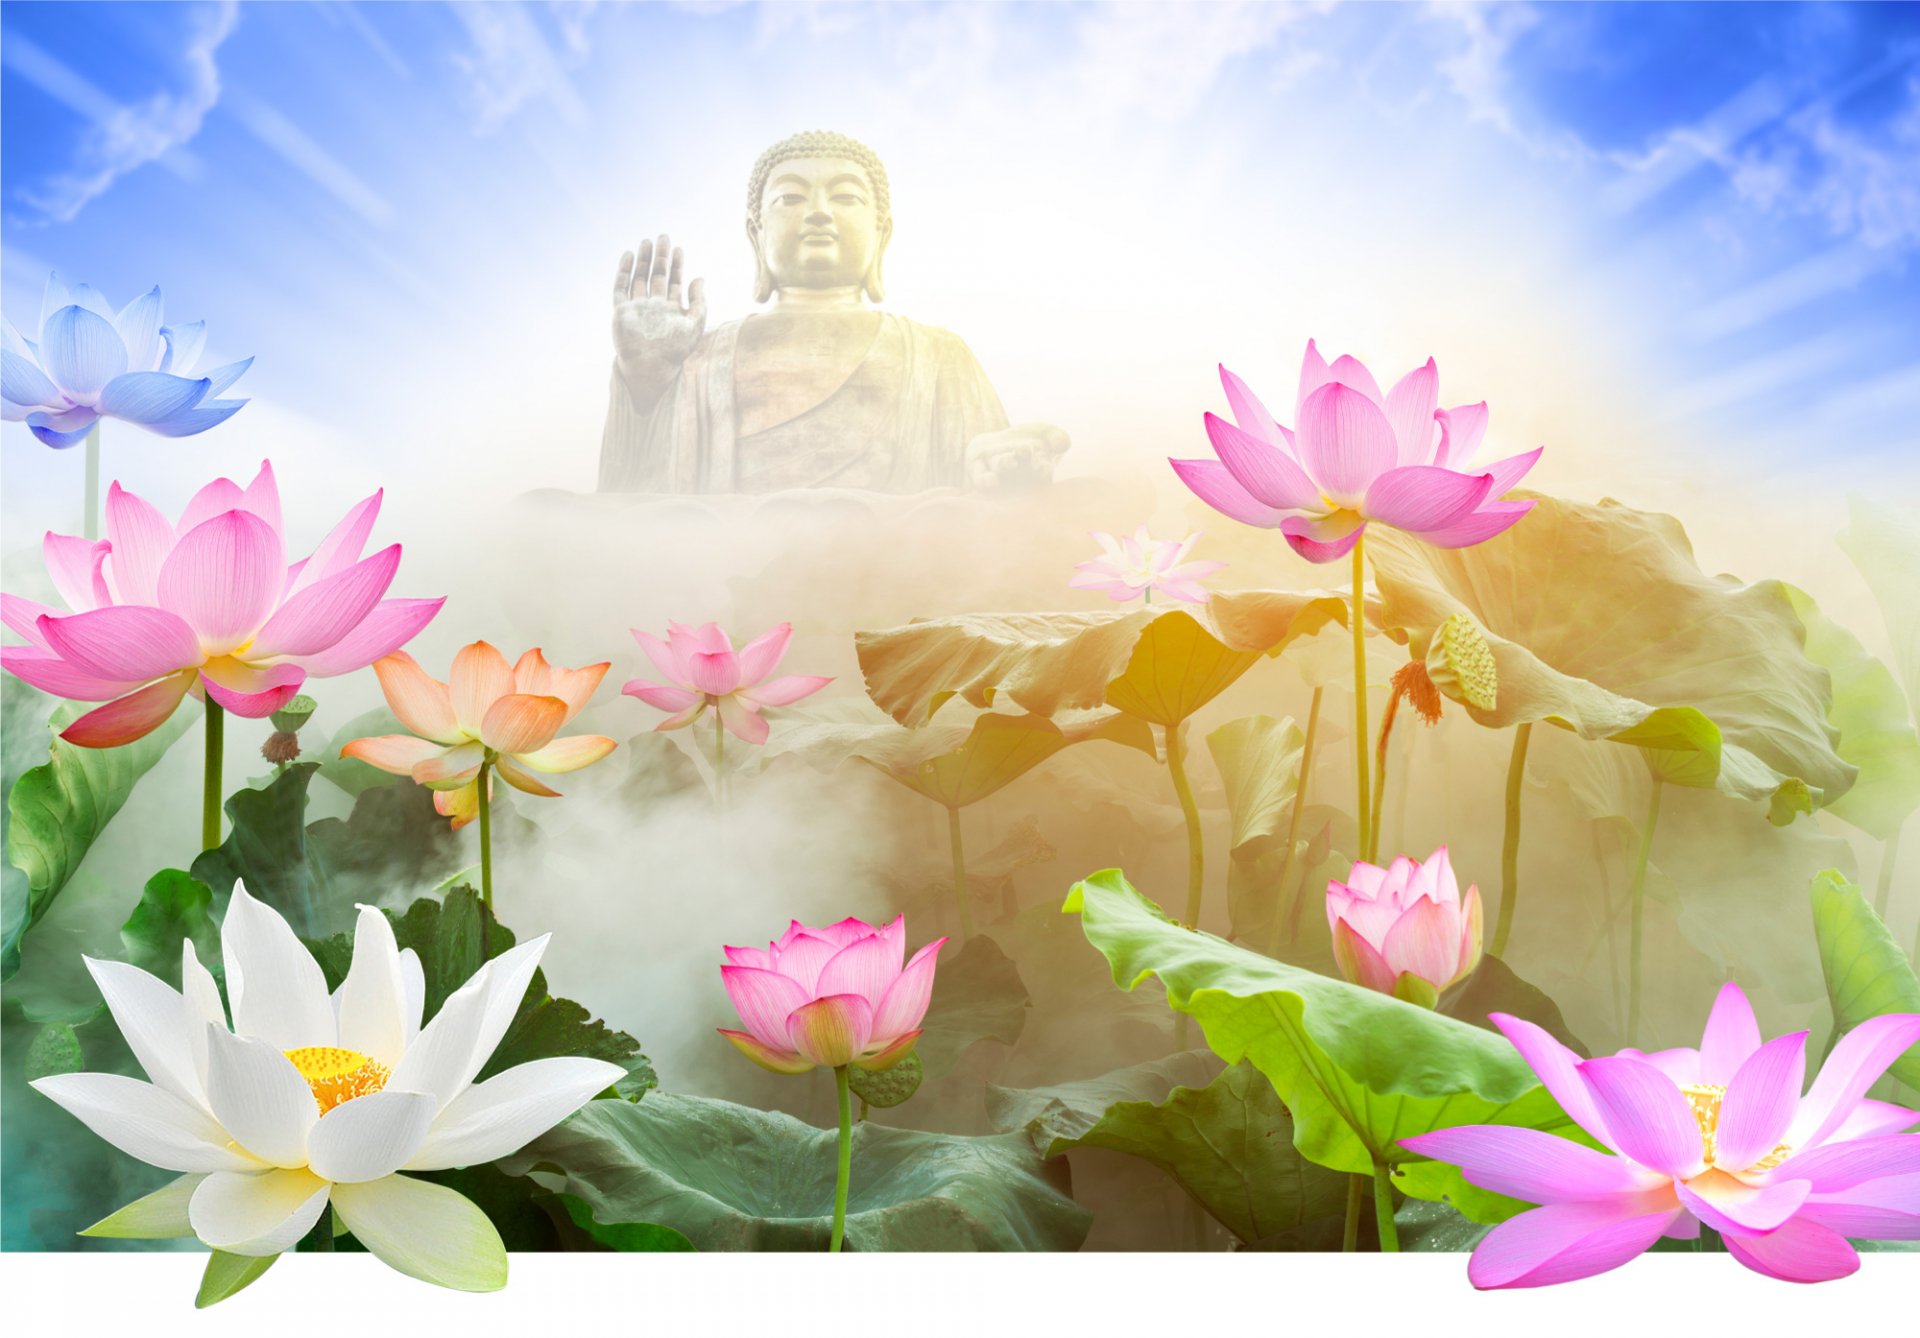 What is the meaning of lotus in Buddhism?